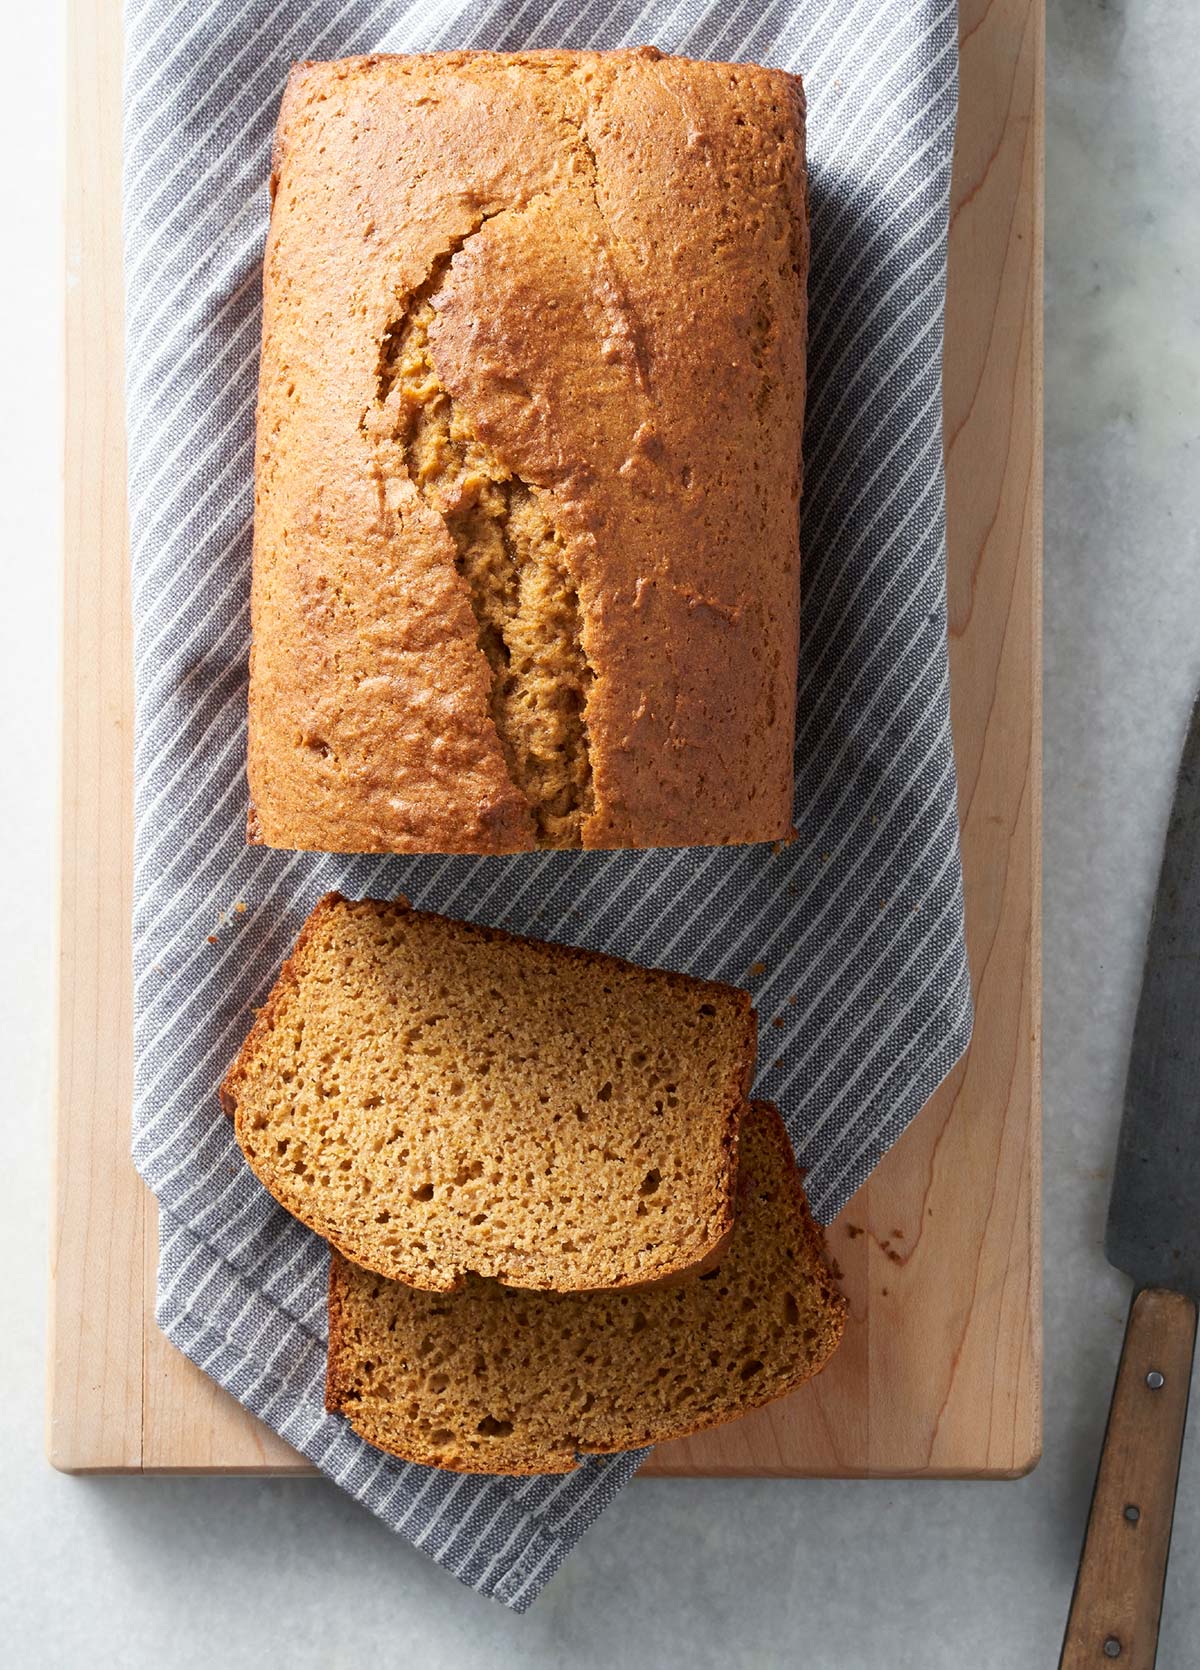 A loaf of Gluten-Free Pumpkin Bread with a few slices